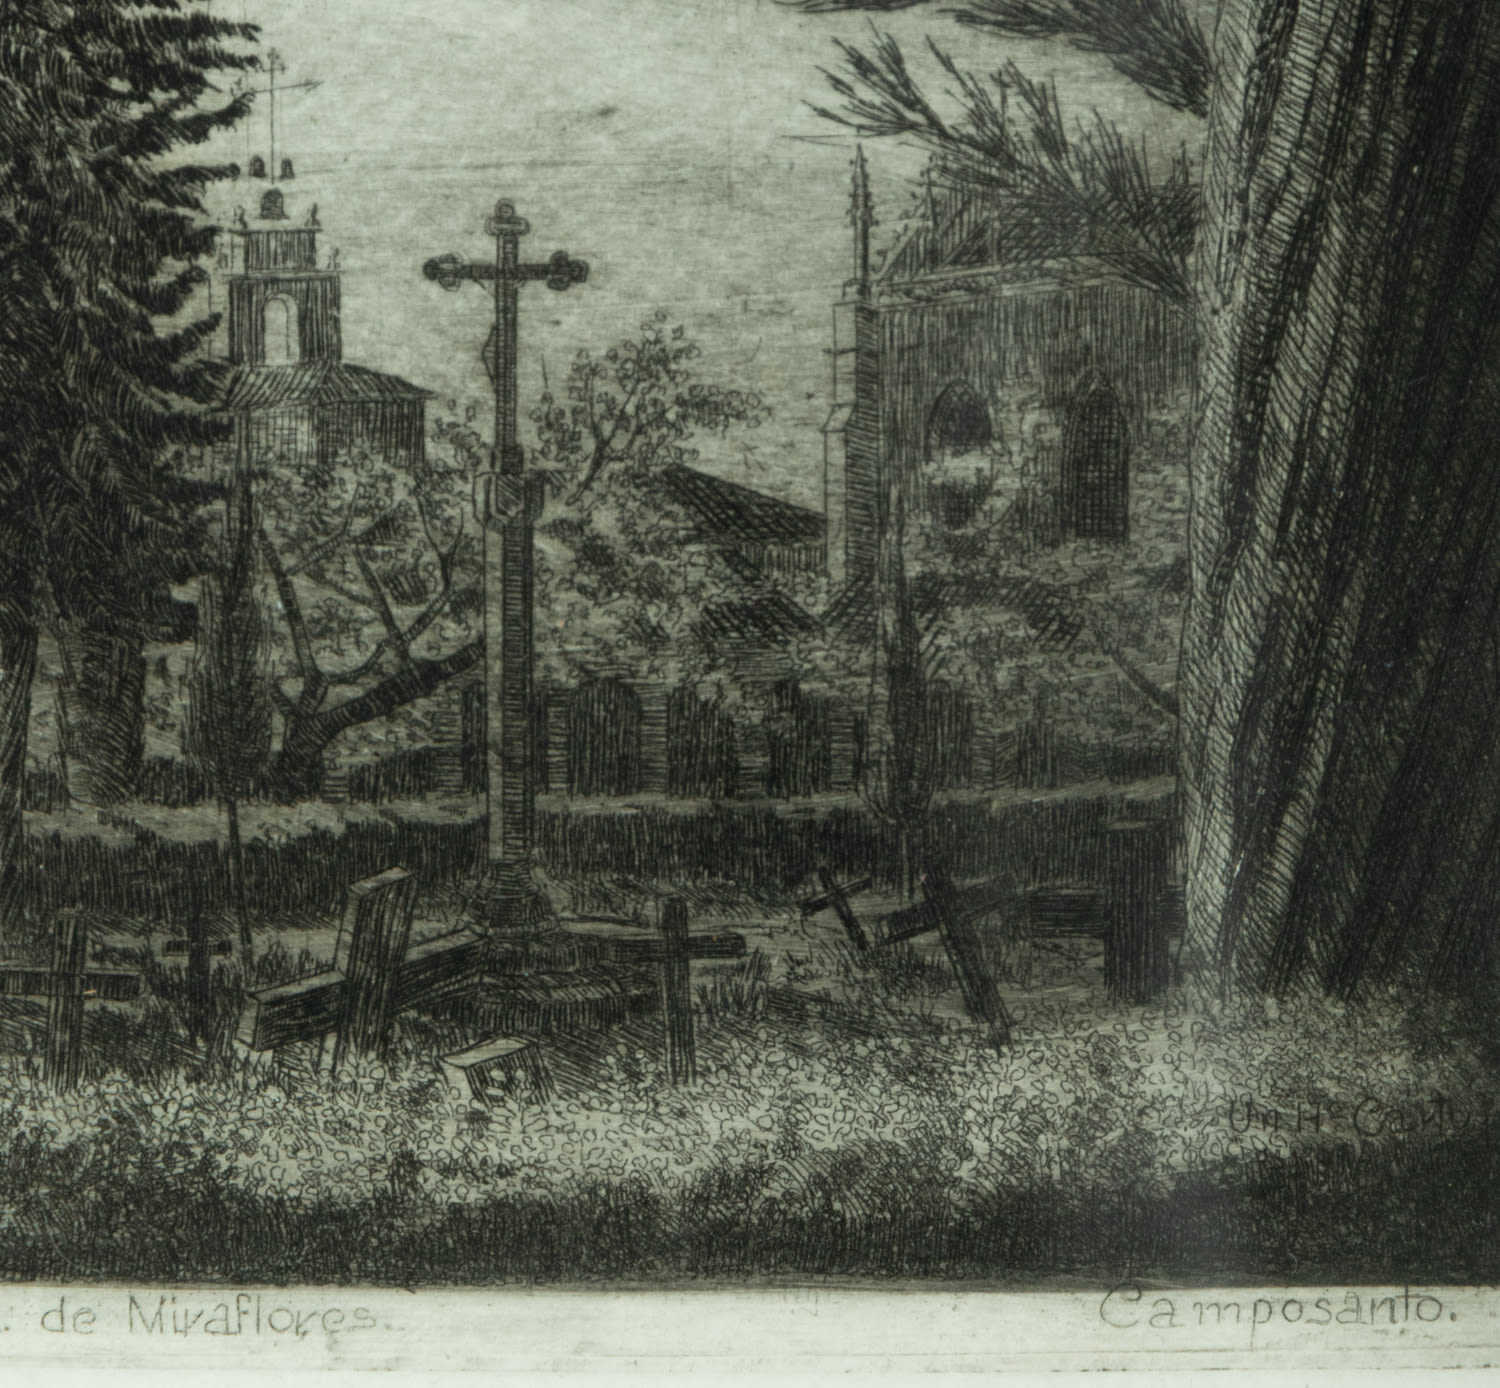 Pair of Engravings on paper from the Miraflores Charterhouse, 20th century - Image 3 of 12